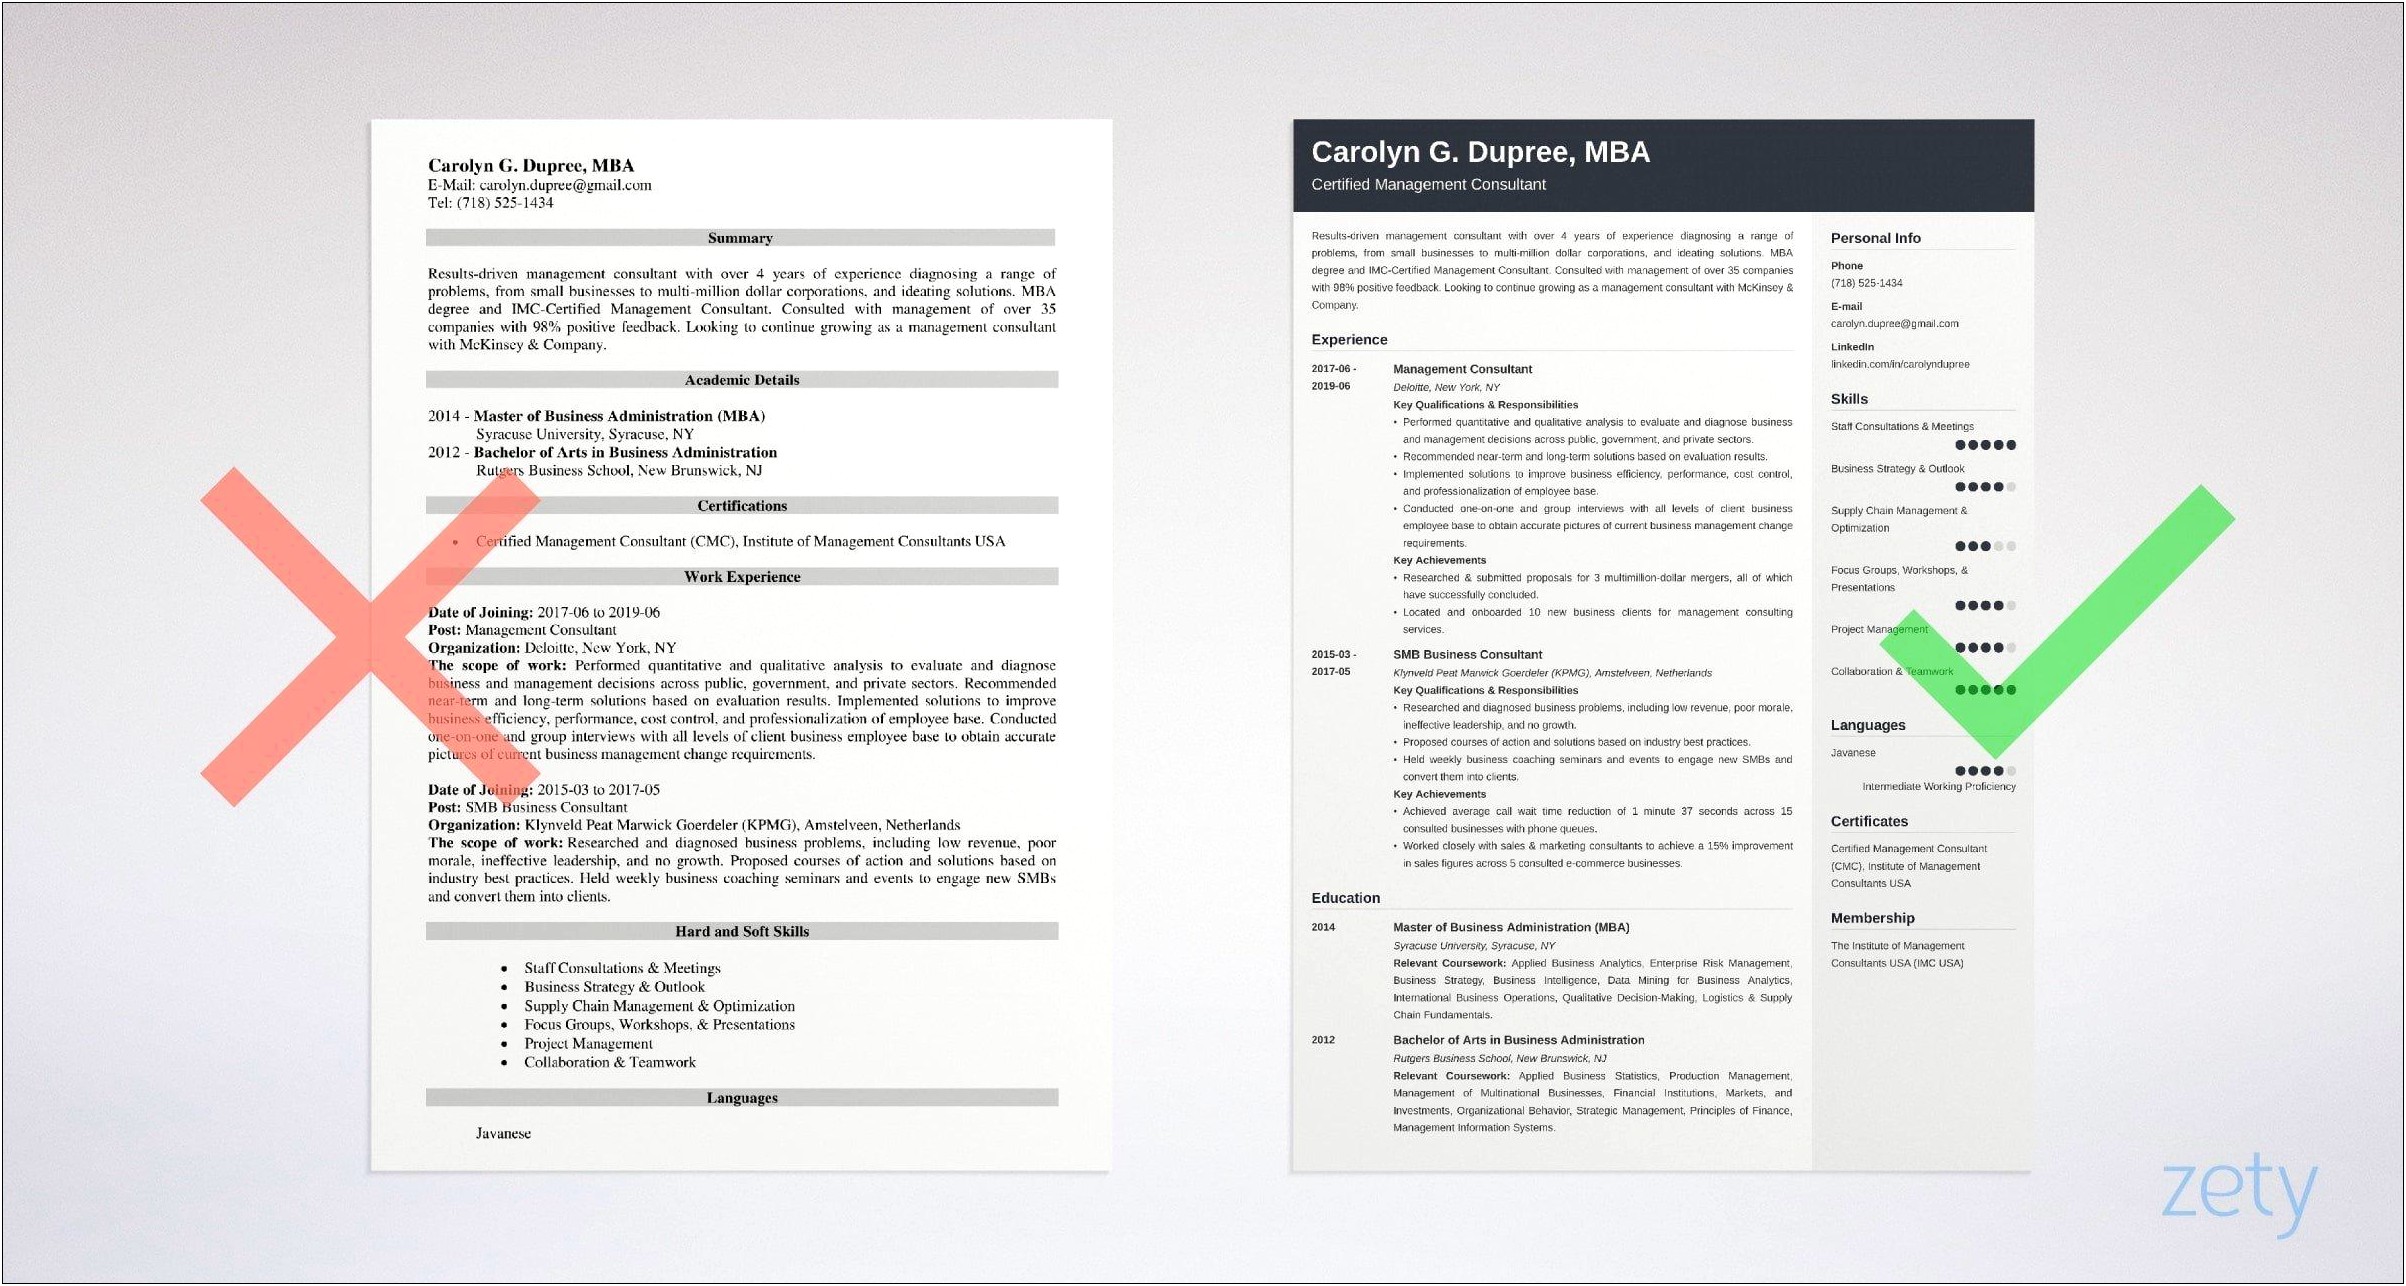 Sample Resume For A Management Consultant